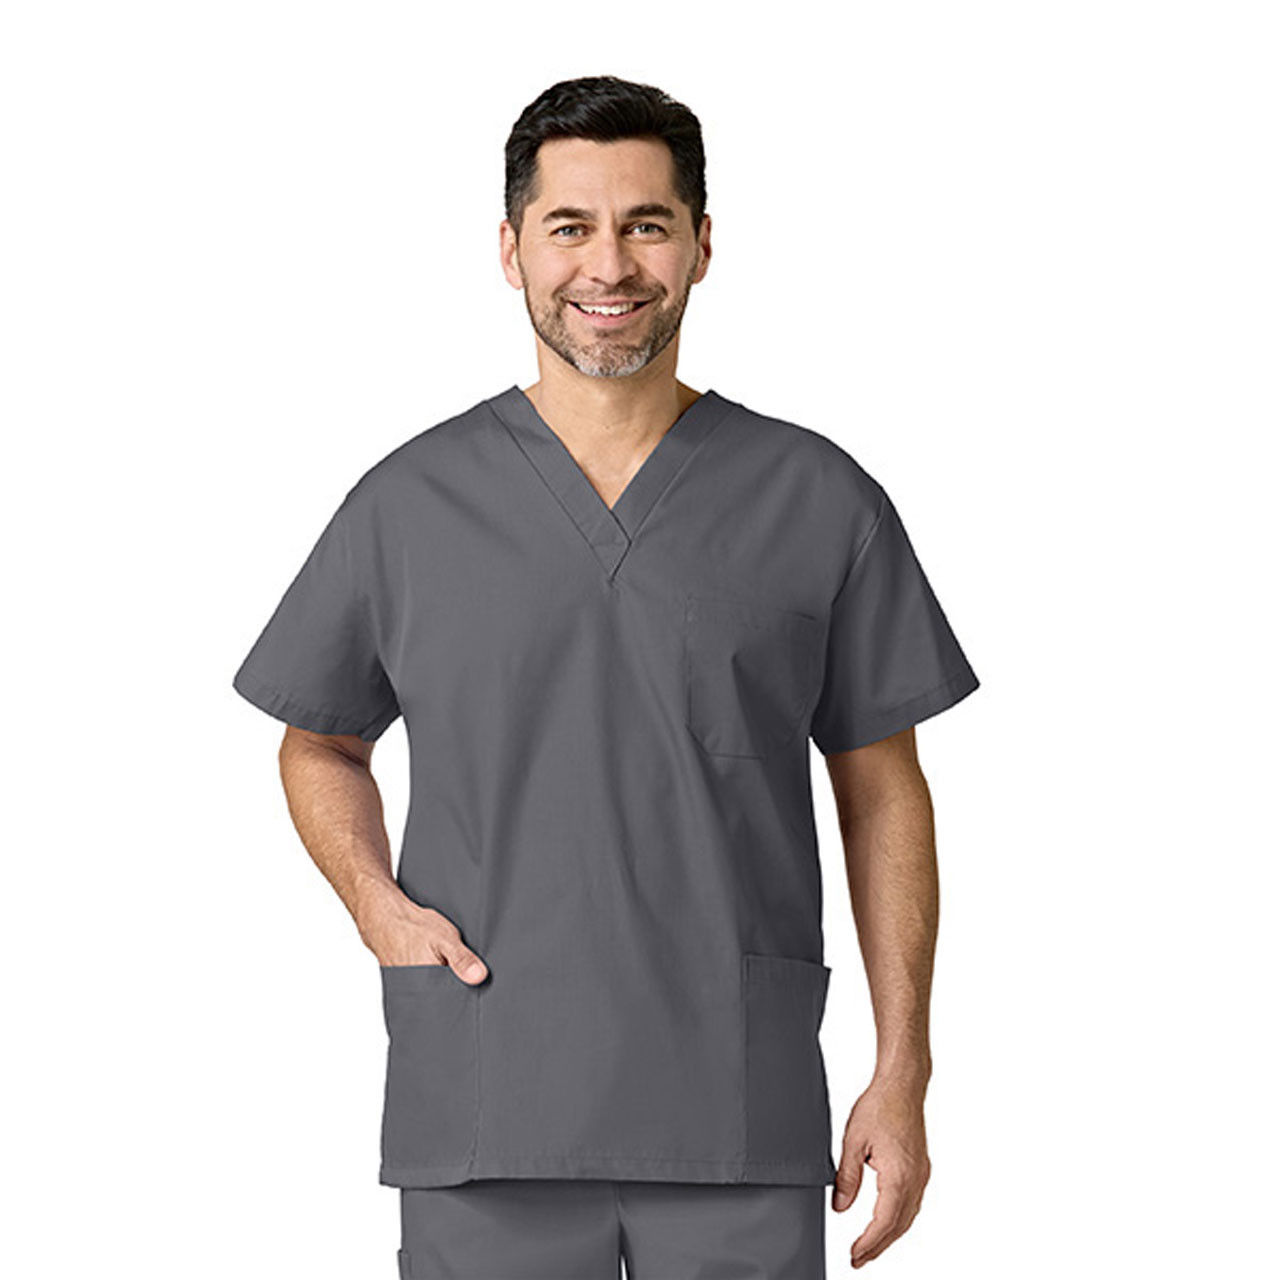 How many fashion seal scrub tops are in a case before I buy?